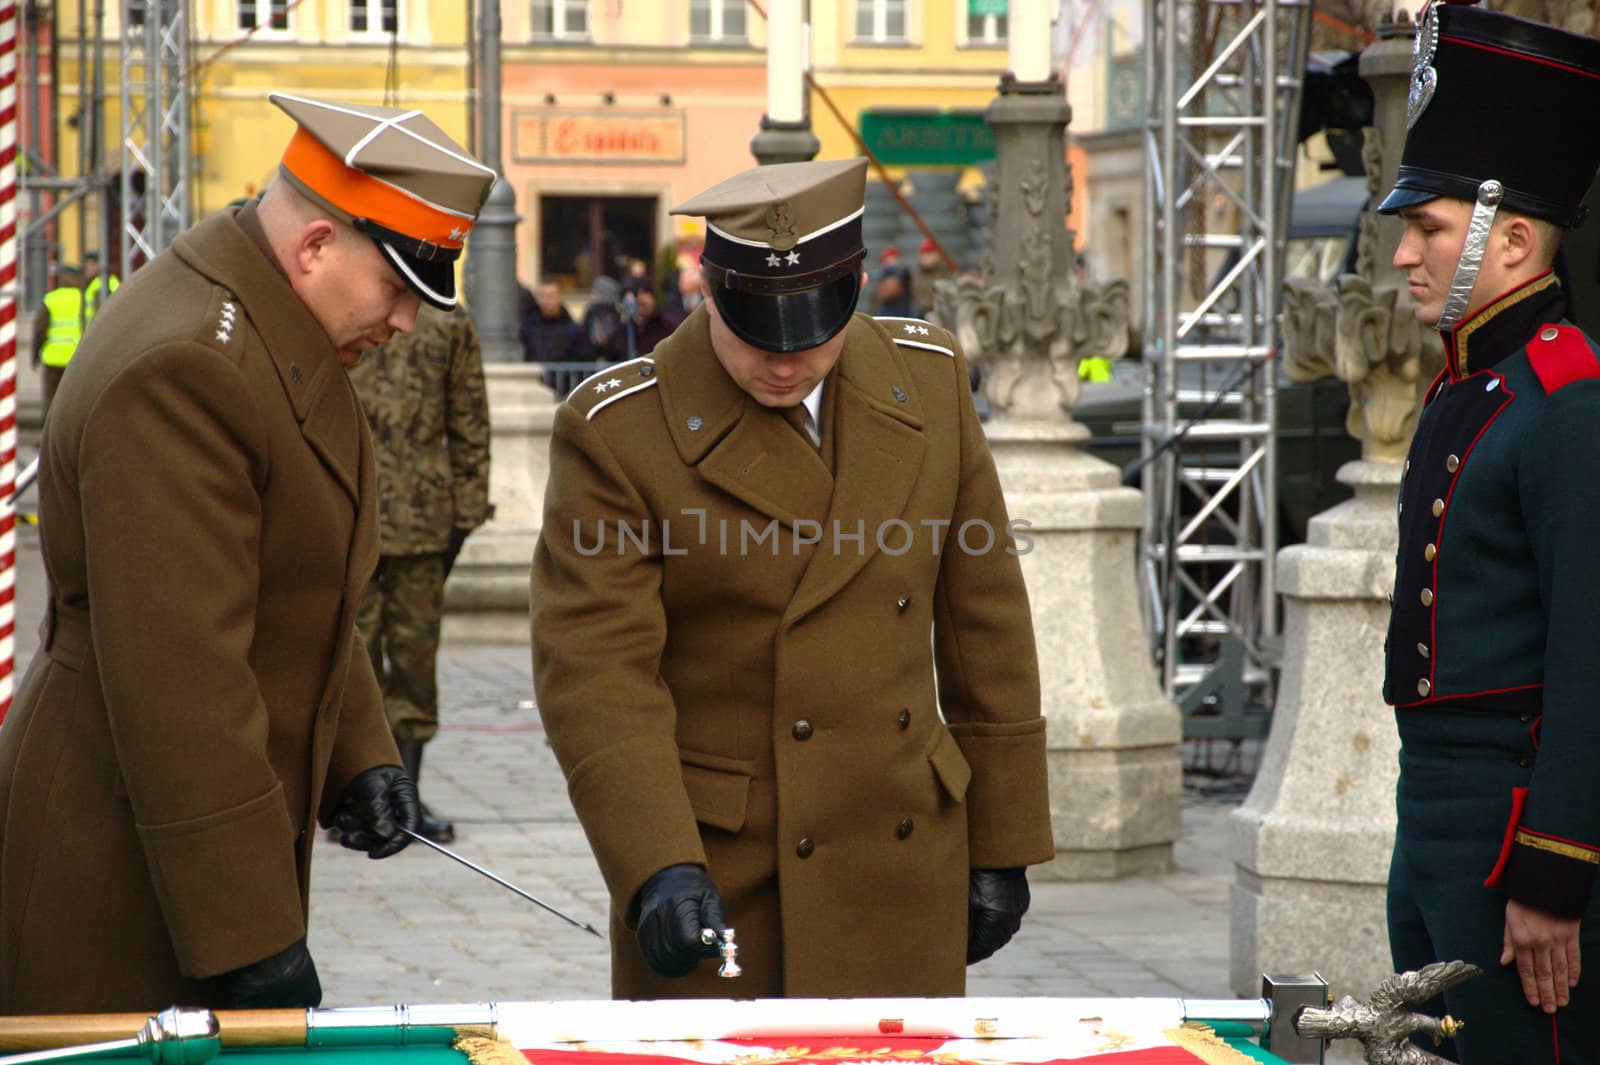 WROCLAW, POLAND - DECEMBER 2: Polish army, engineering training center for troops receives new army banner. Officer blesses new banner on December 2, 2011.